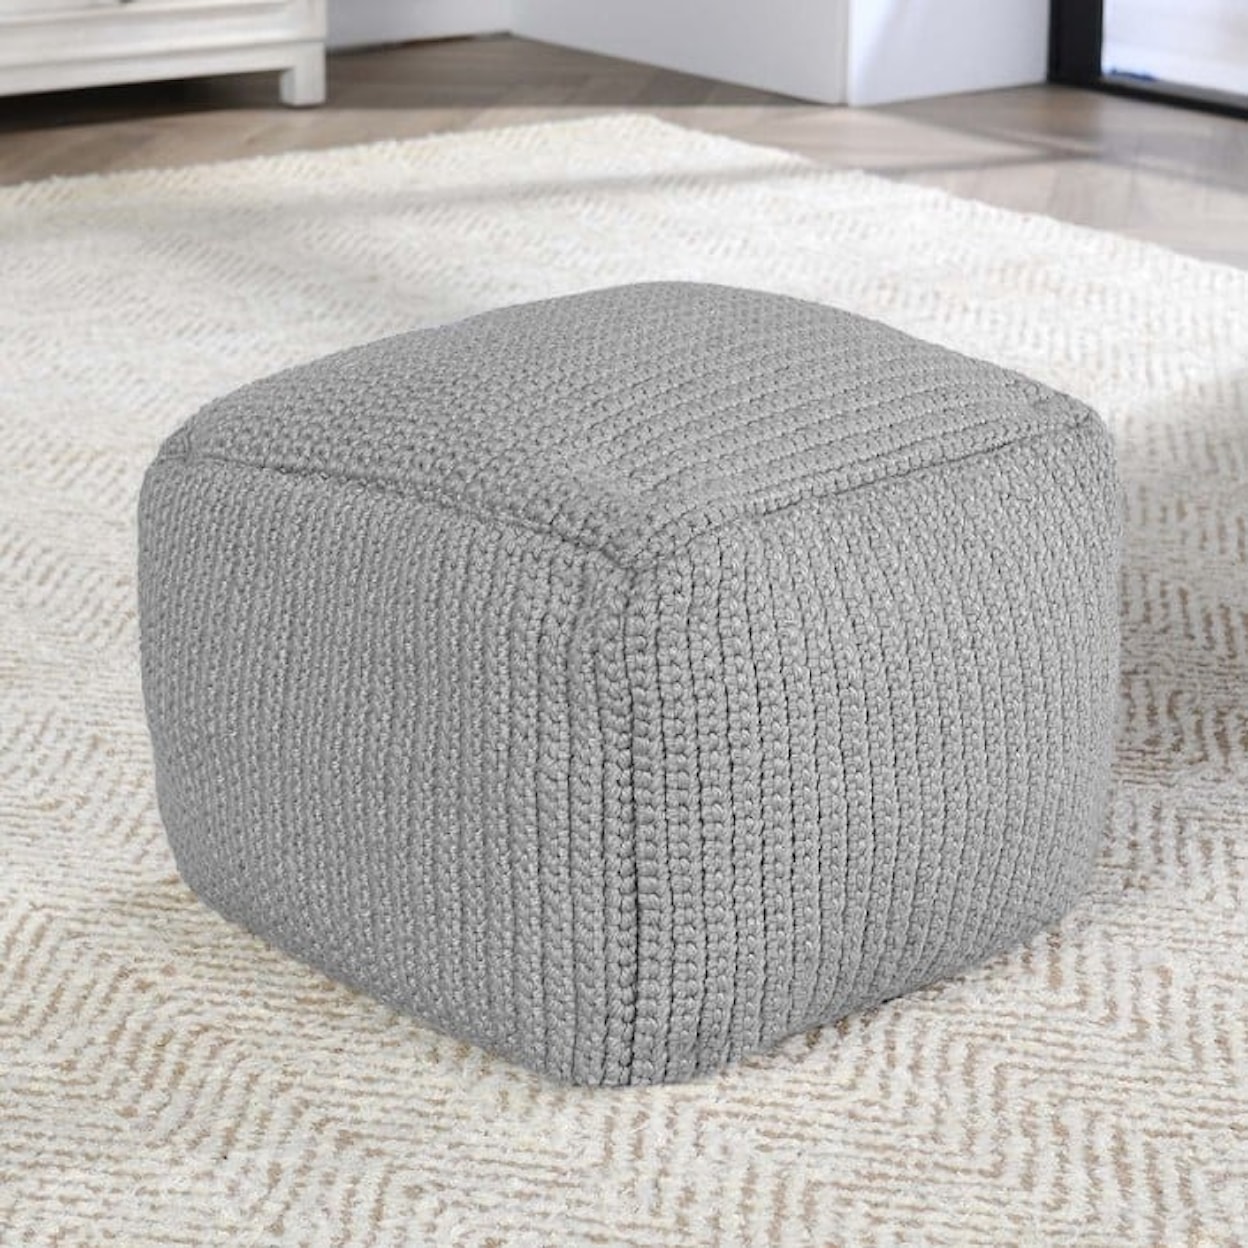 Classic Home Floor Cushions PERFORMANCE PRISM GRAY POUF